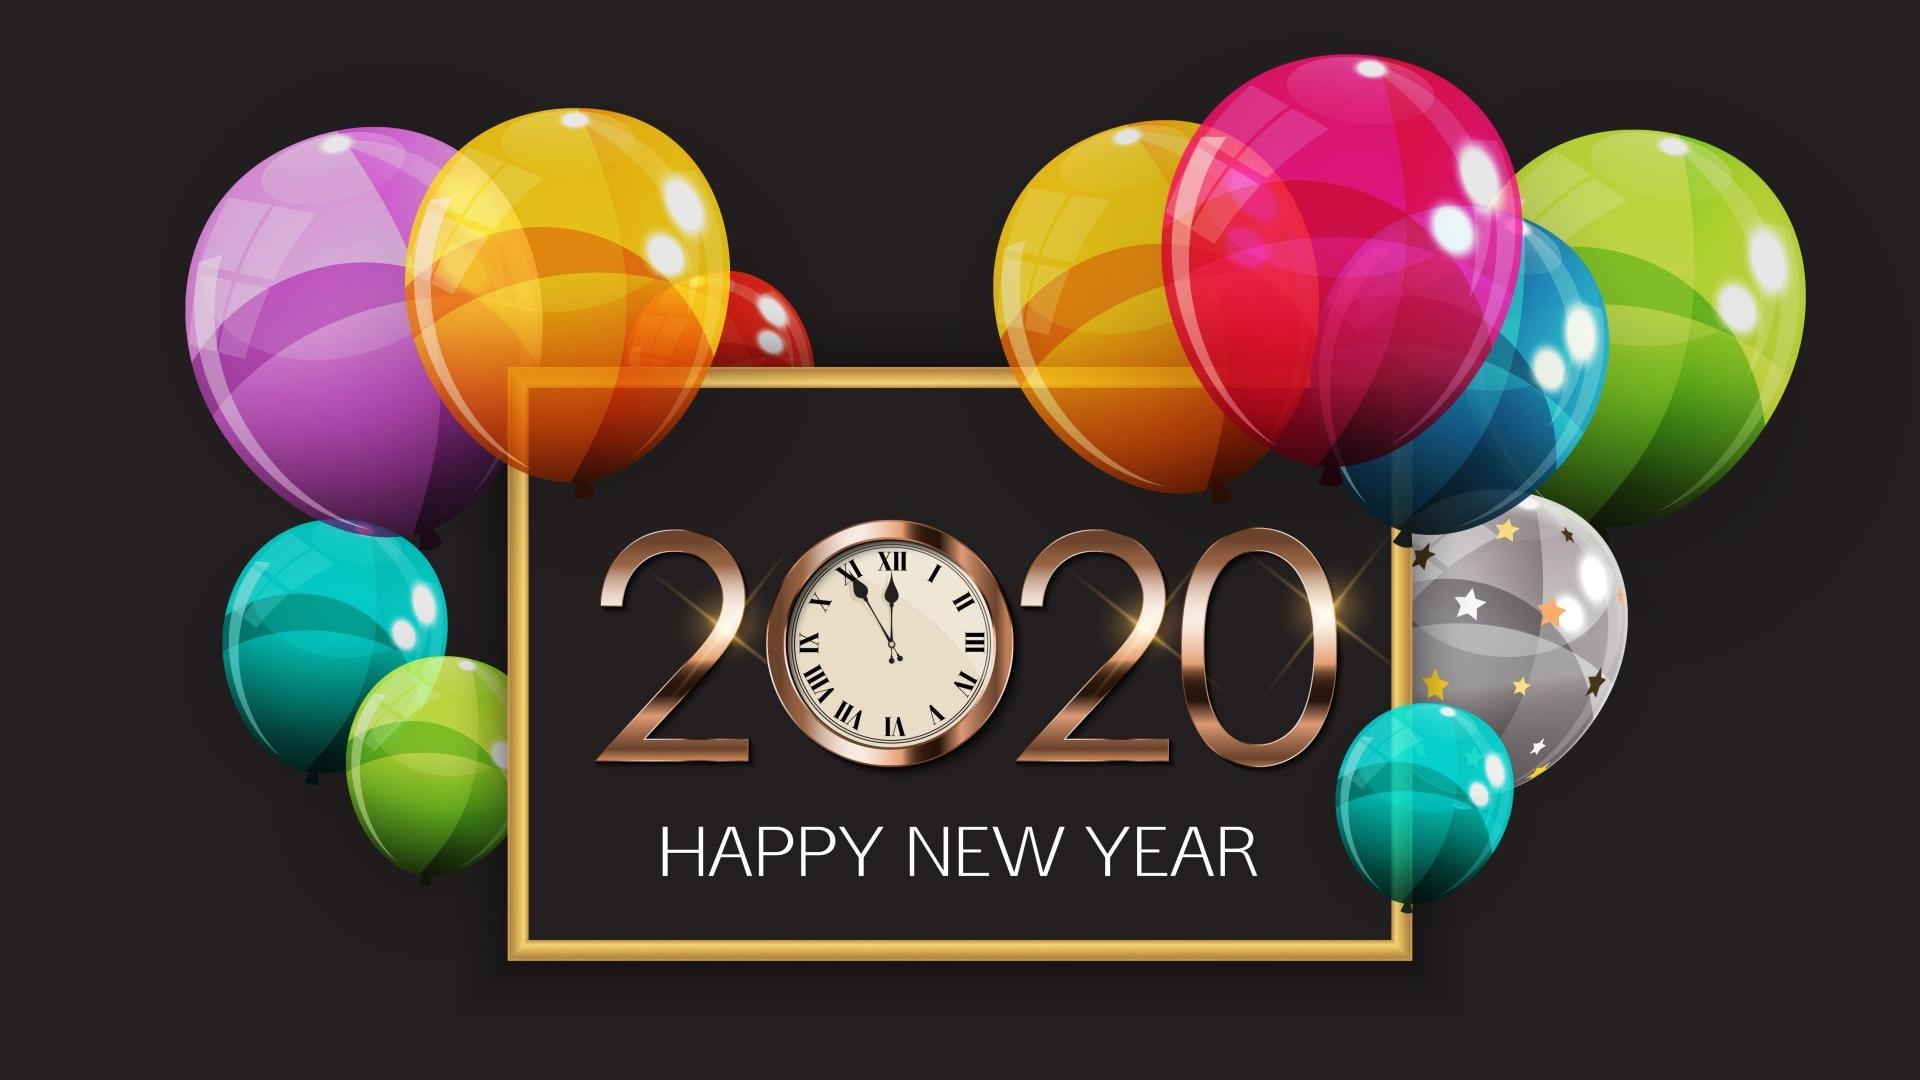 Happy New Year Image 2020 Free Download